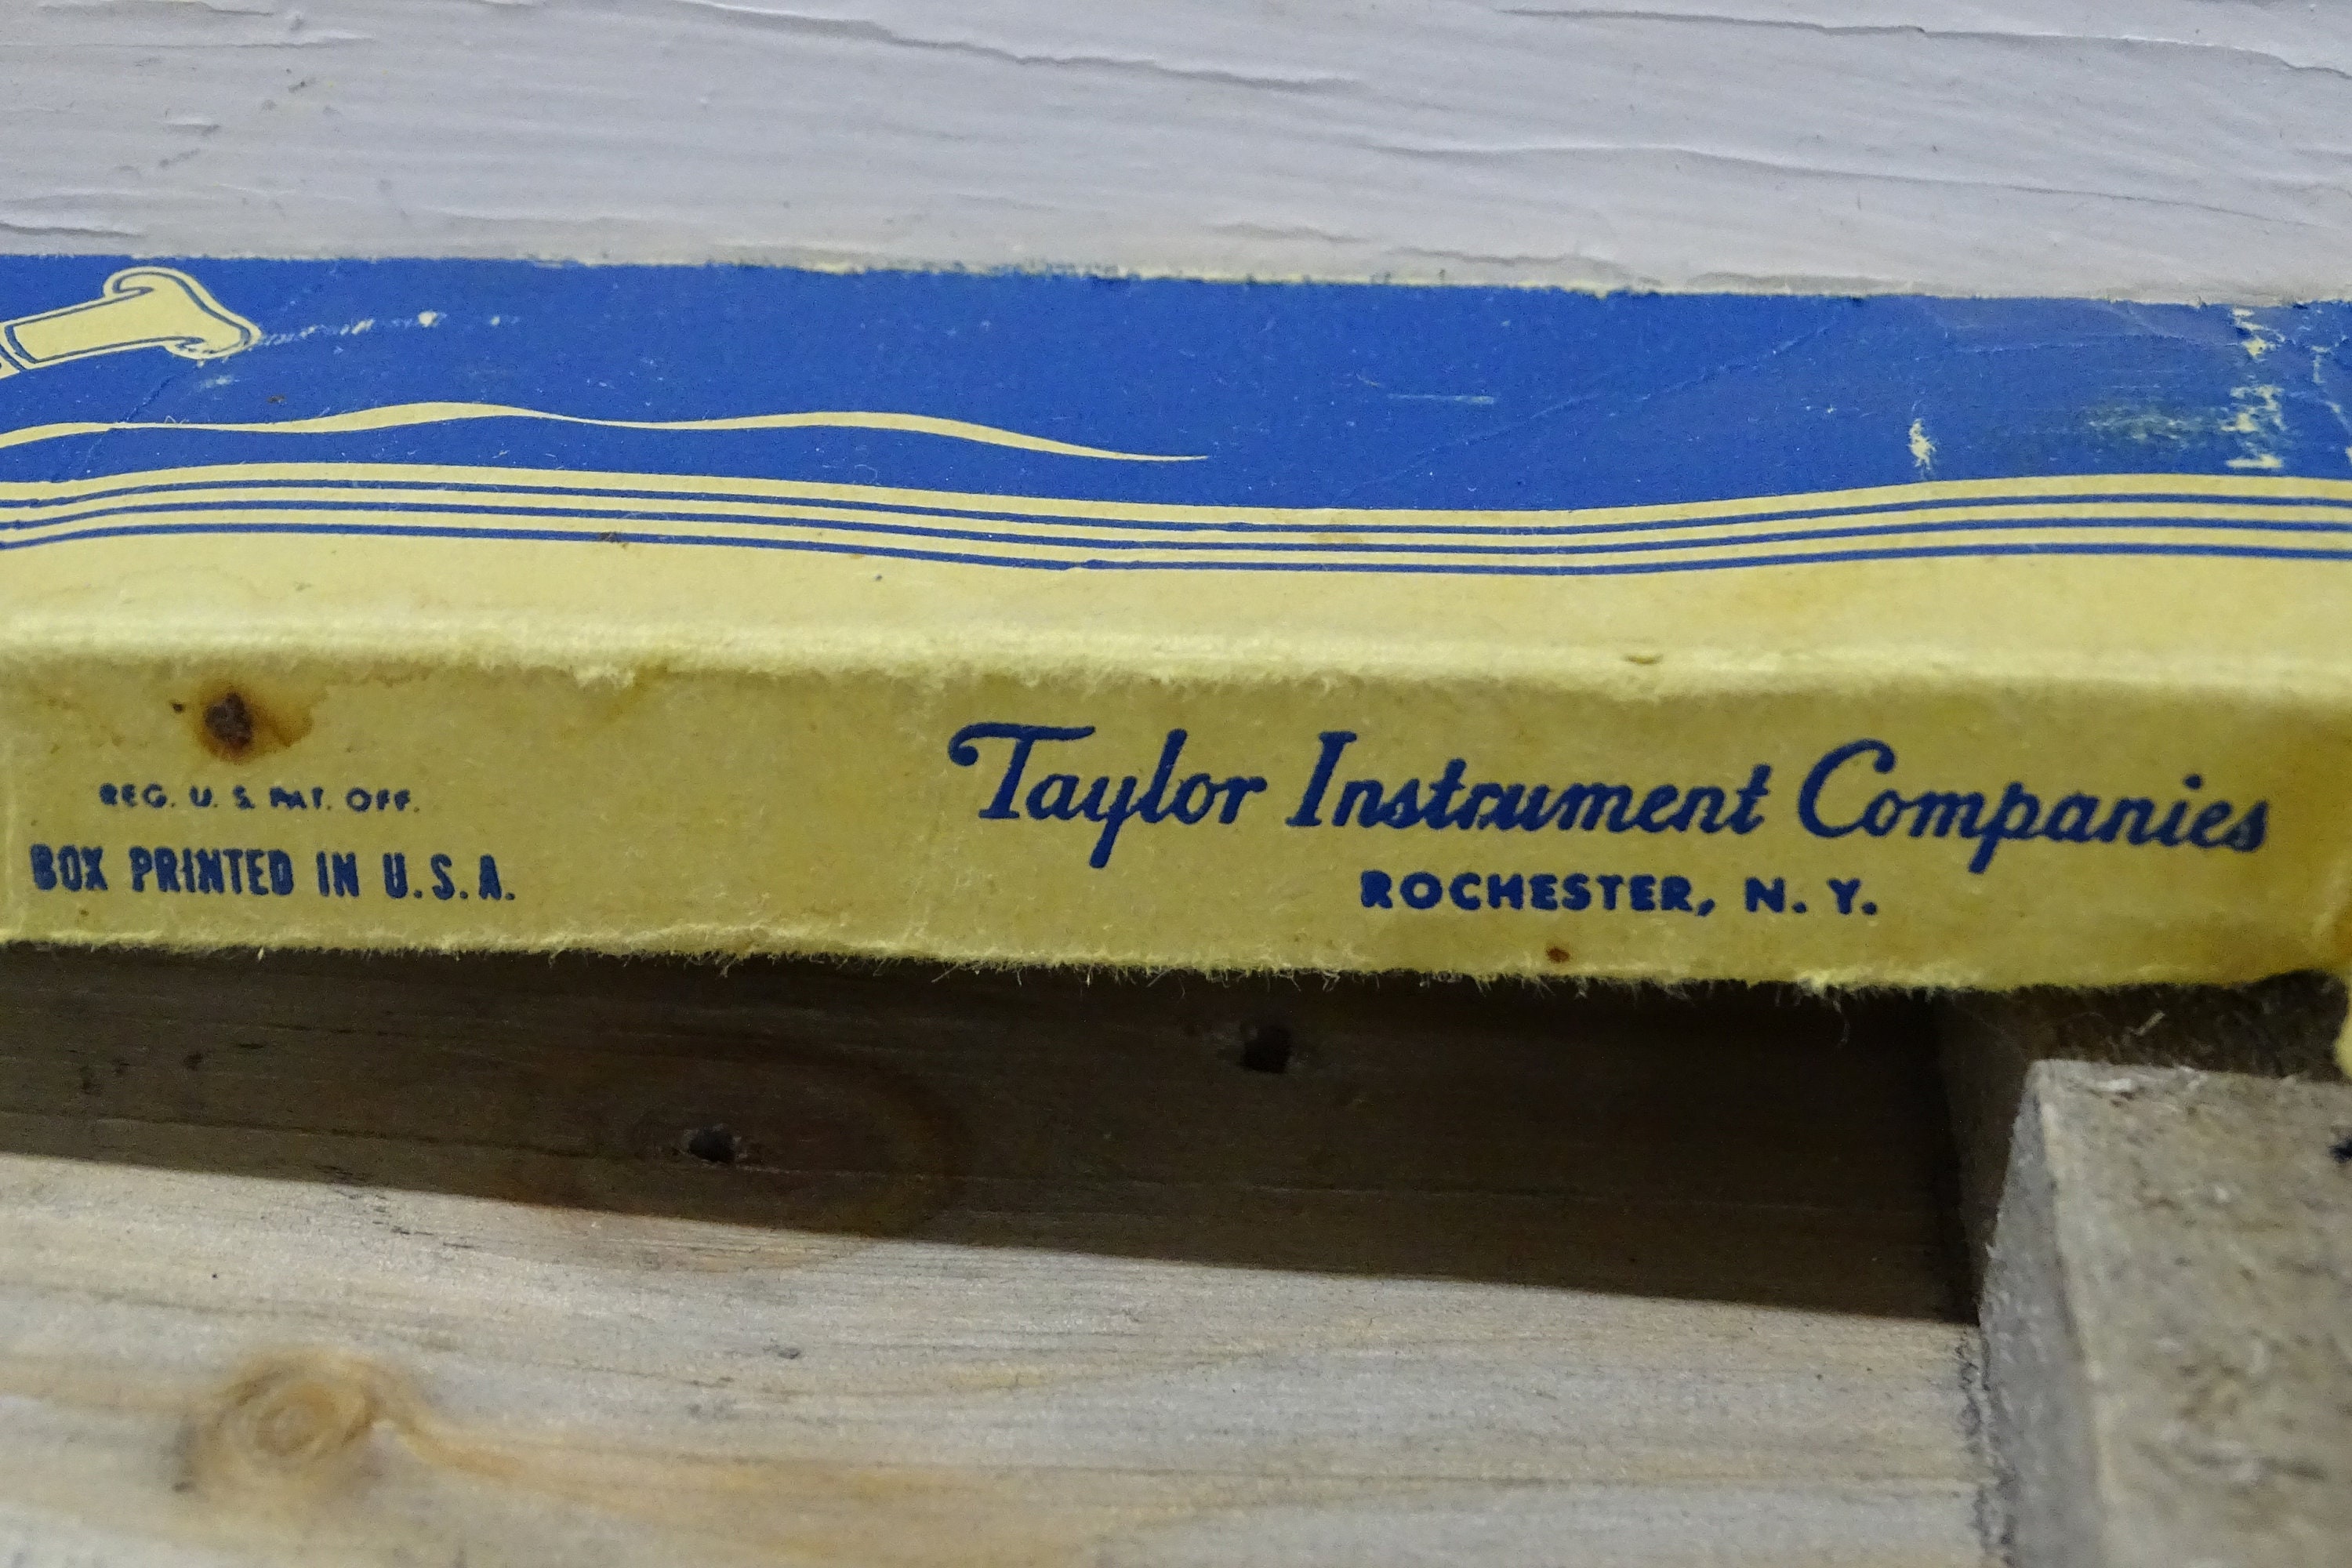 Vintage 50"s TAYLOR DEEP FRYING-GUIDE Teal Wood Handle Thermometer  Original Box